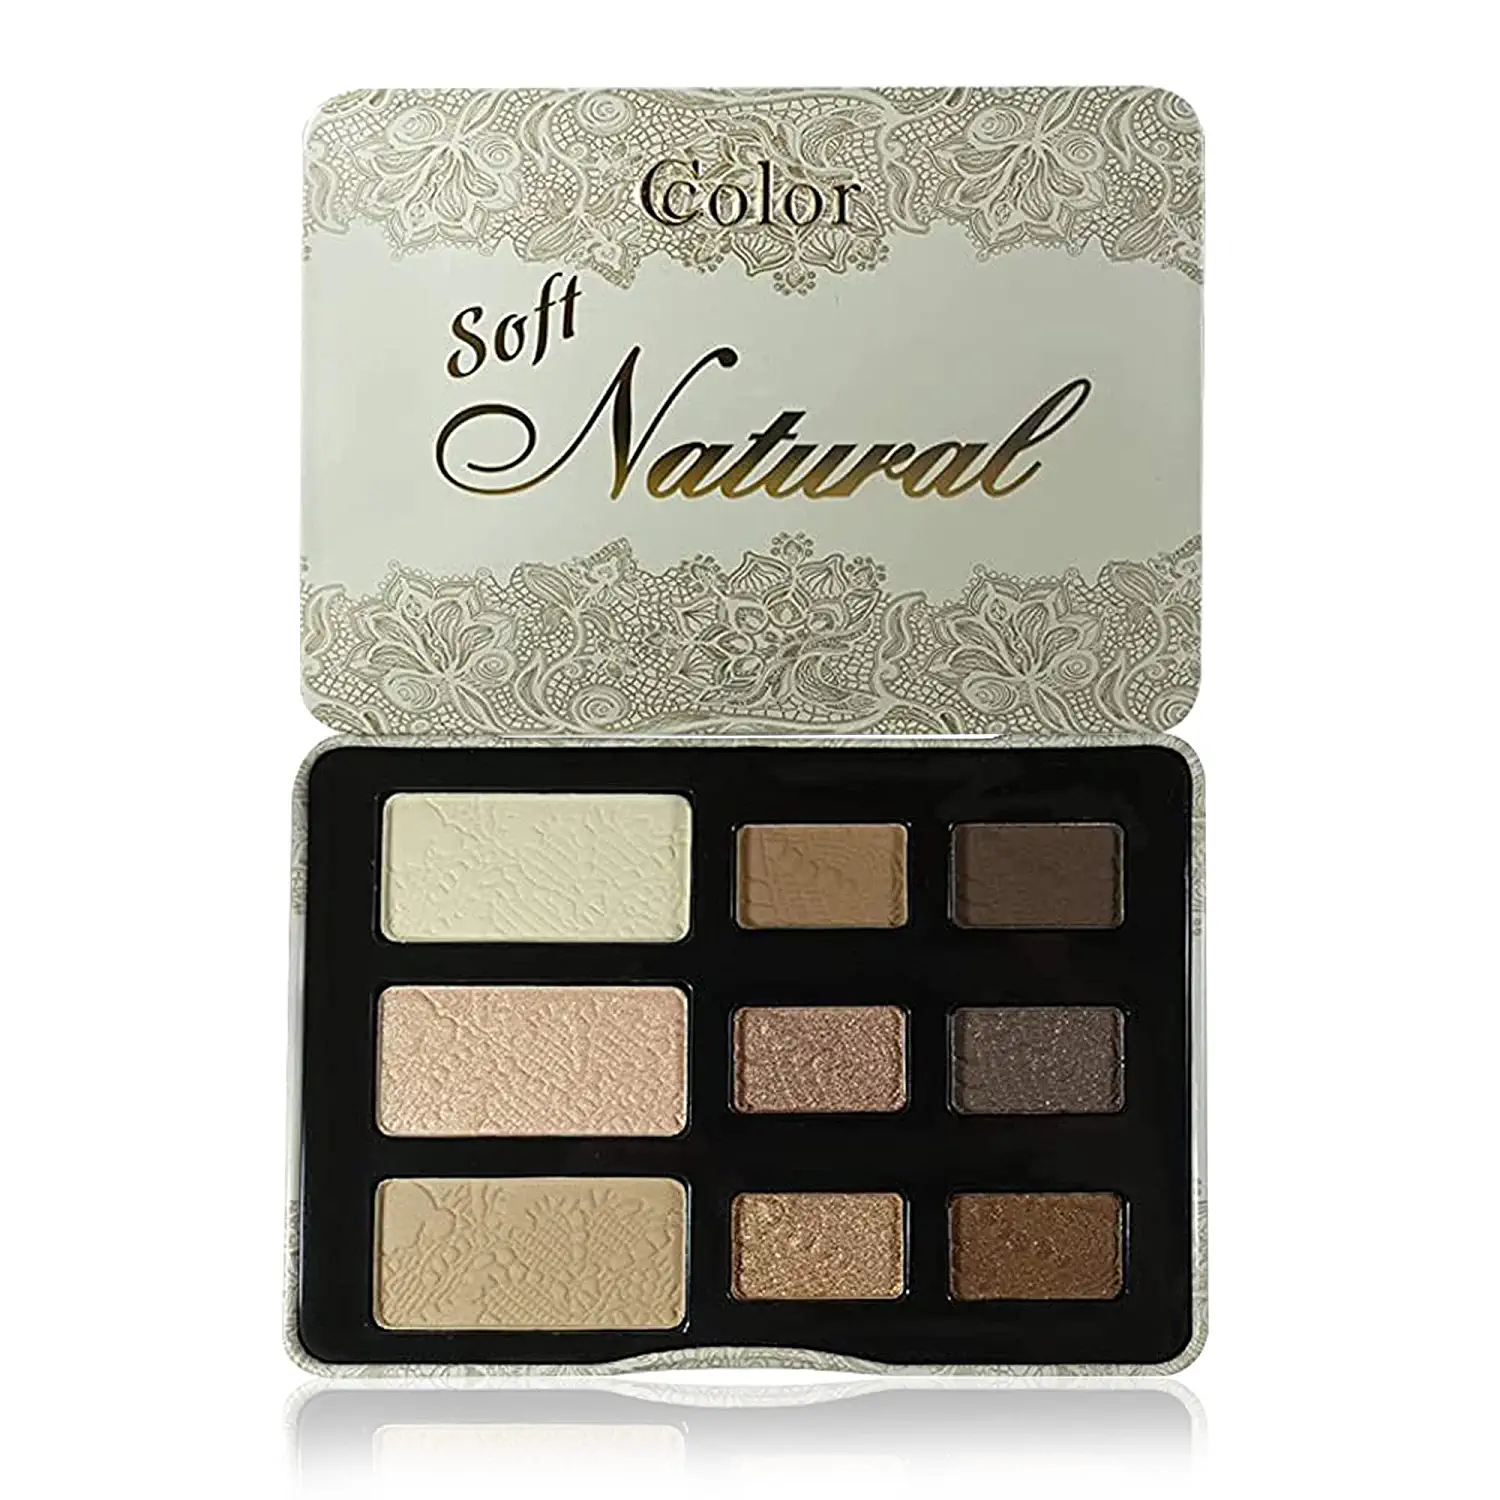 Ccolor Cosmetics Paraben-Free Palette Eyeshadow Compact